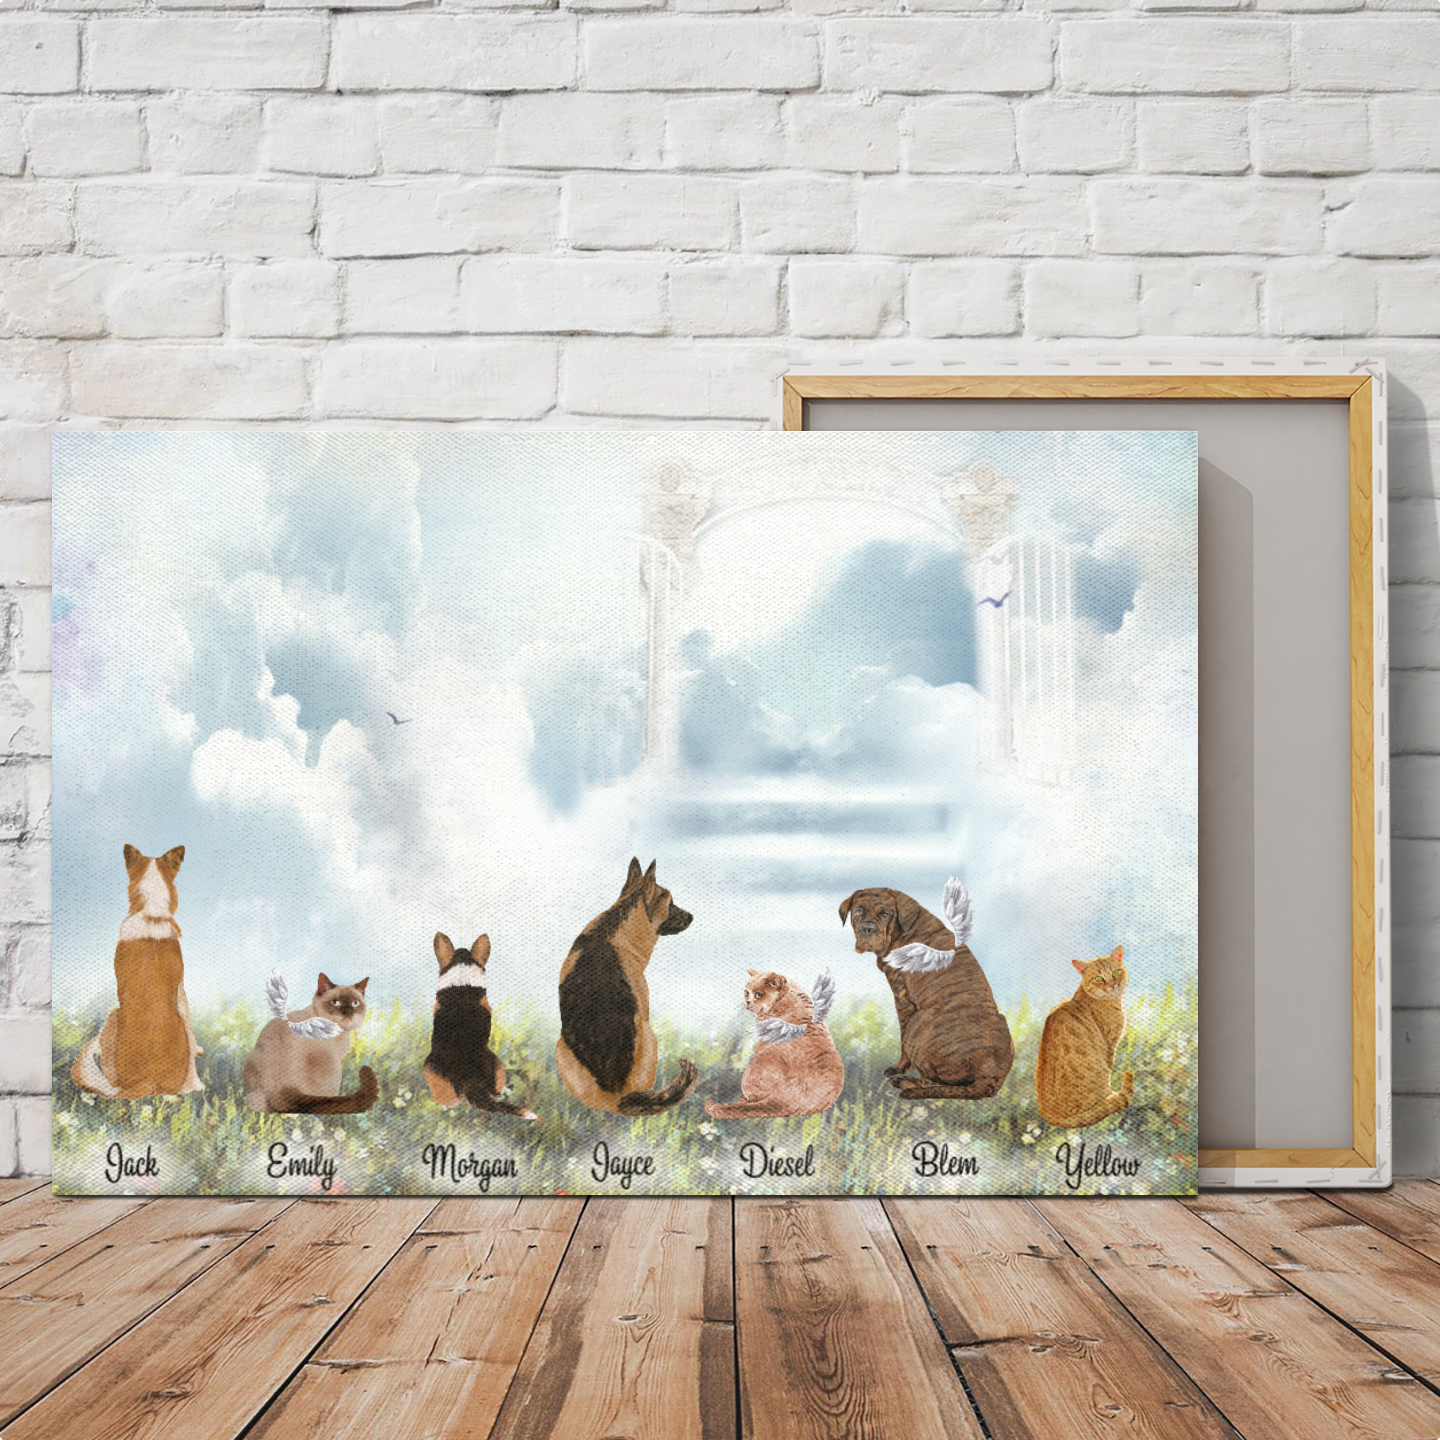 Ciaocustom Poster/Framed Canvas/Unframed Canvas, Custom Dog & Cat Breeds/Name/Background/Text, Dogs & Cats Talking On The Heaven